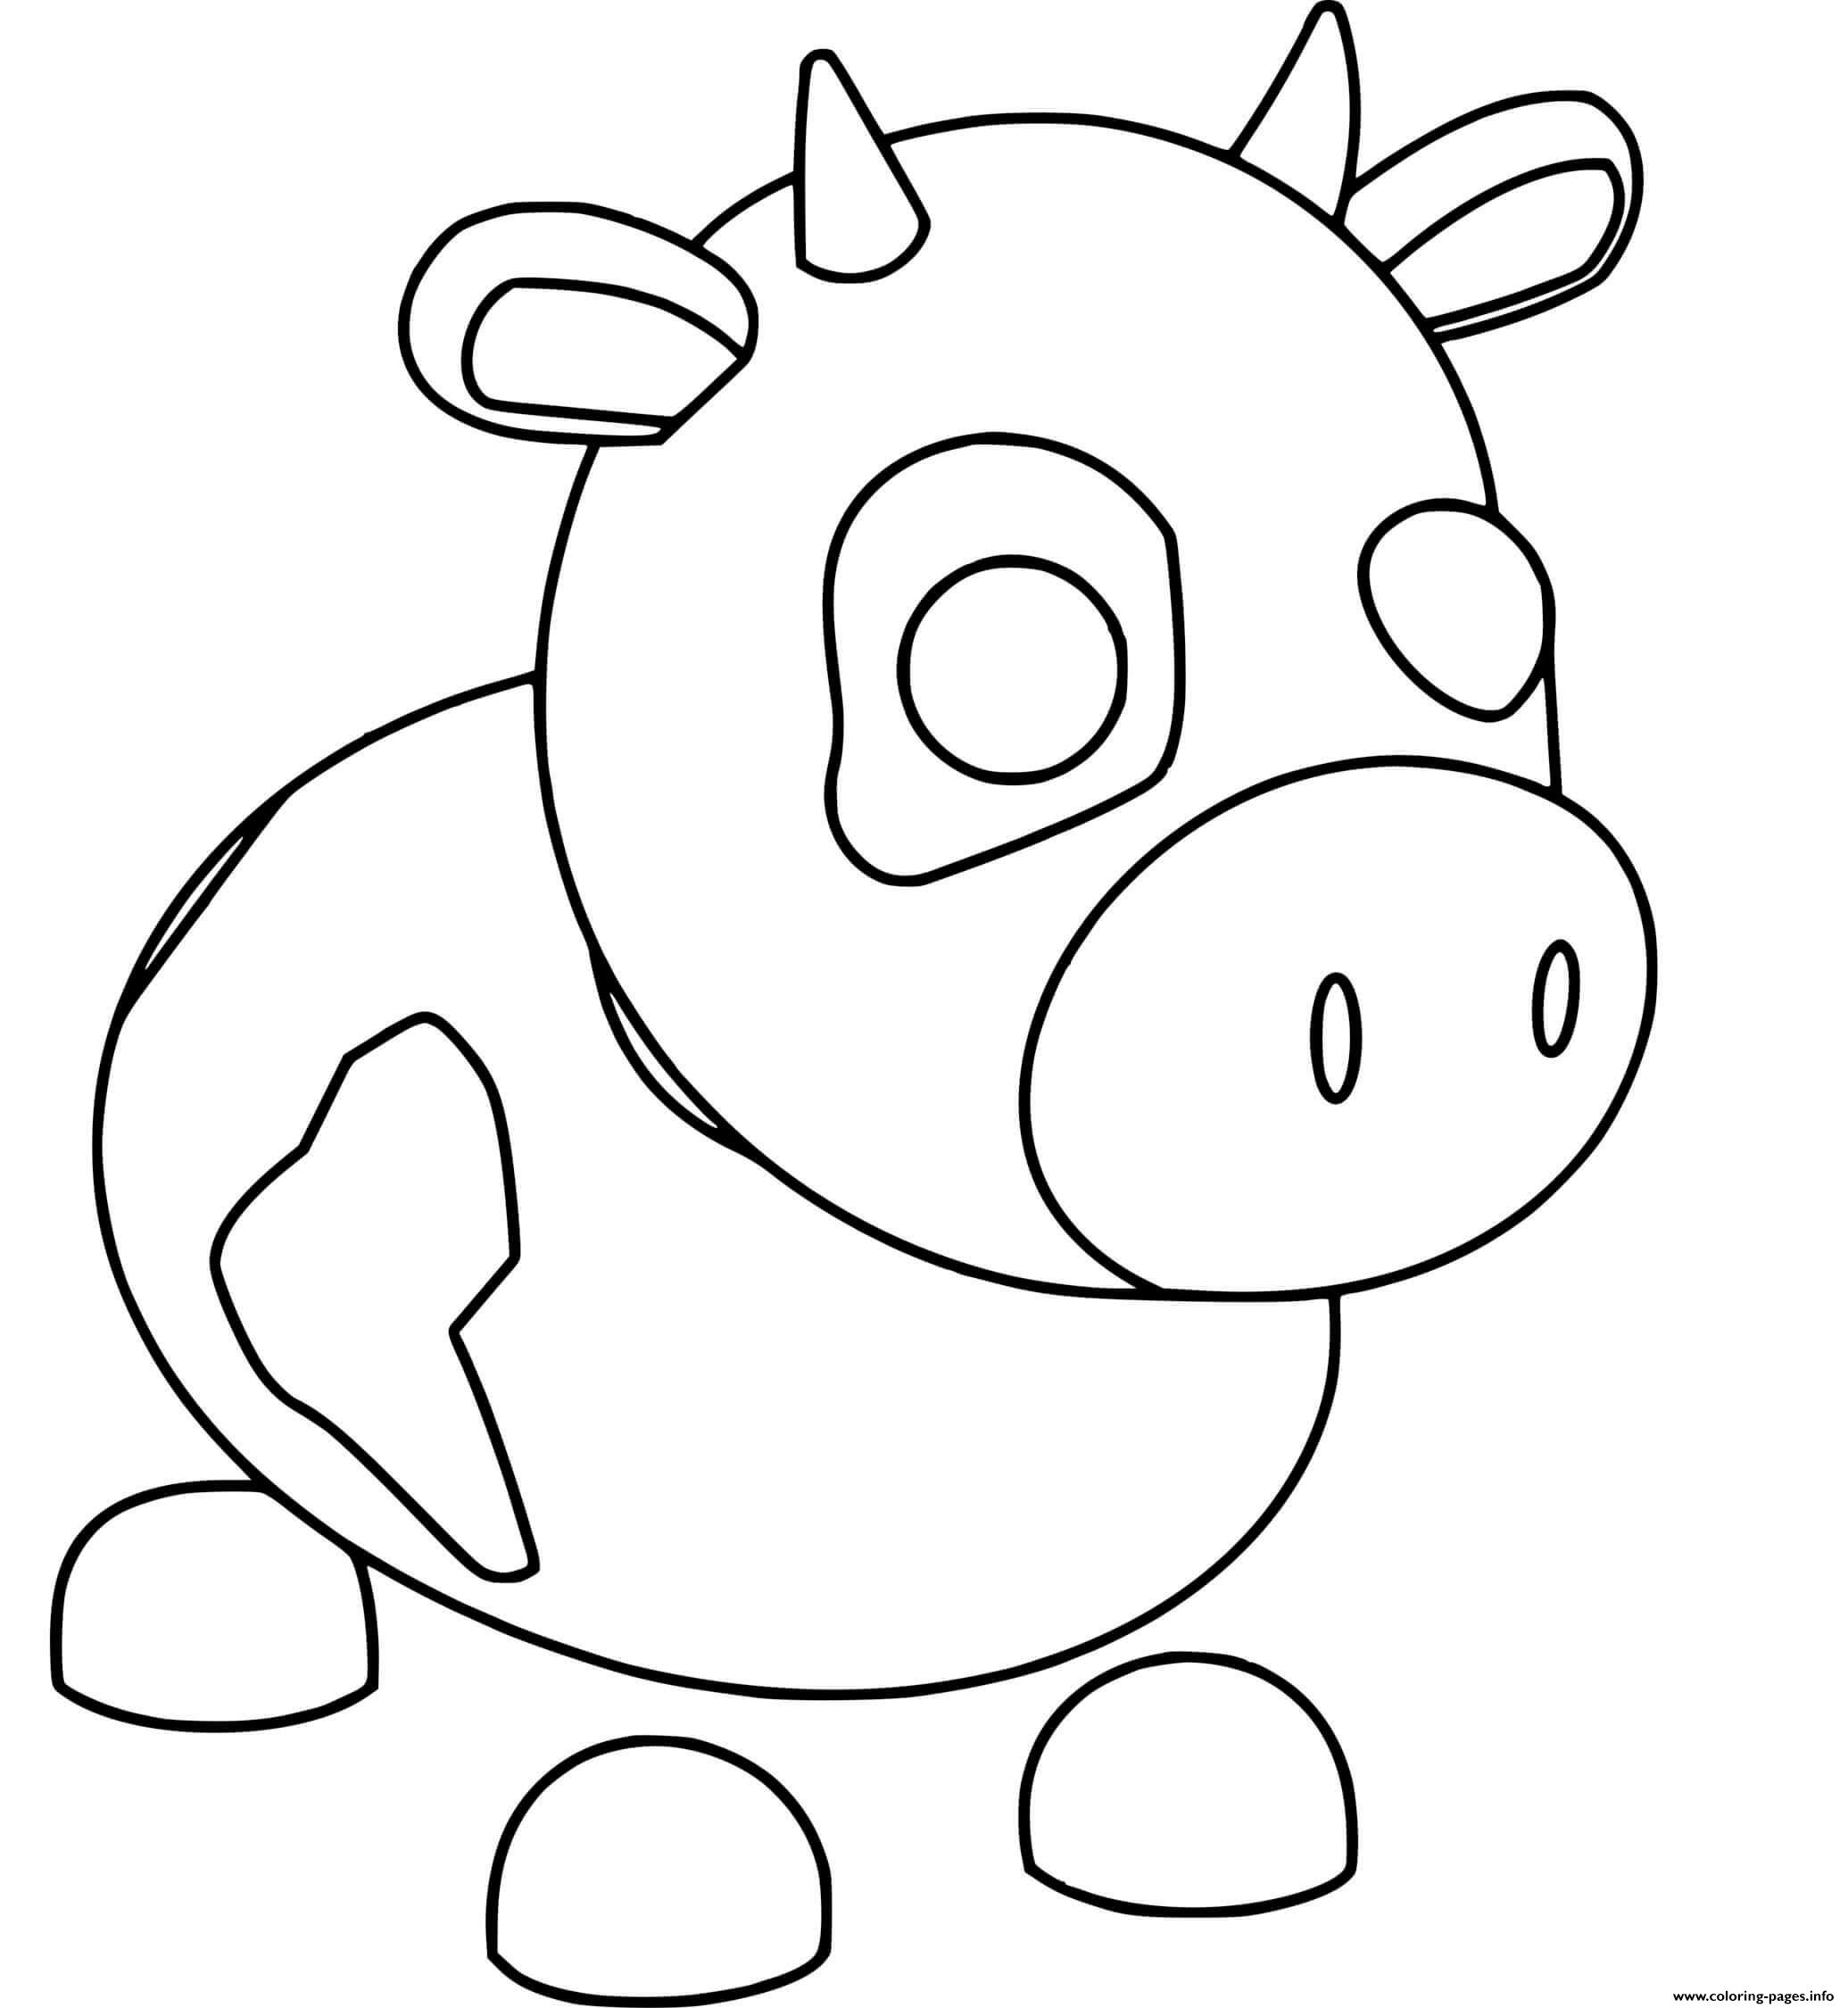 Adopt Me Cow Roblox Coloring Pages Printable